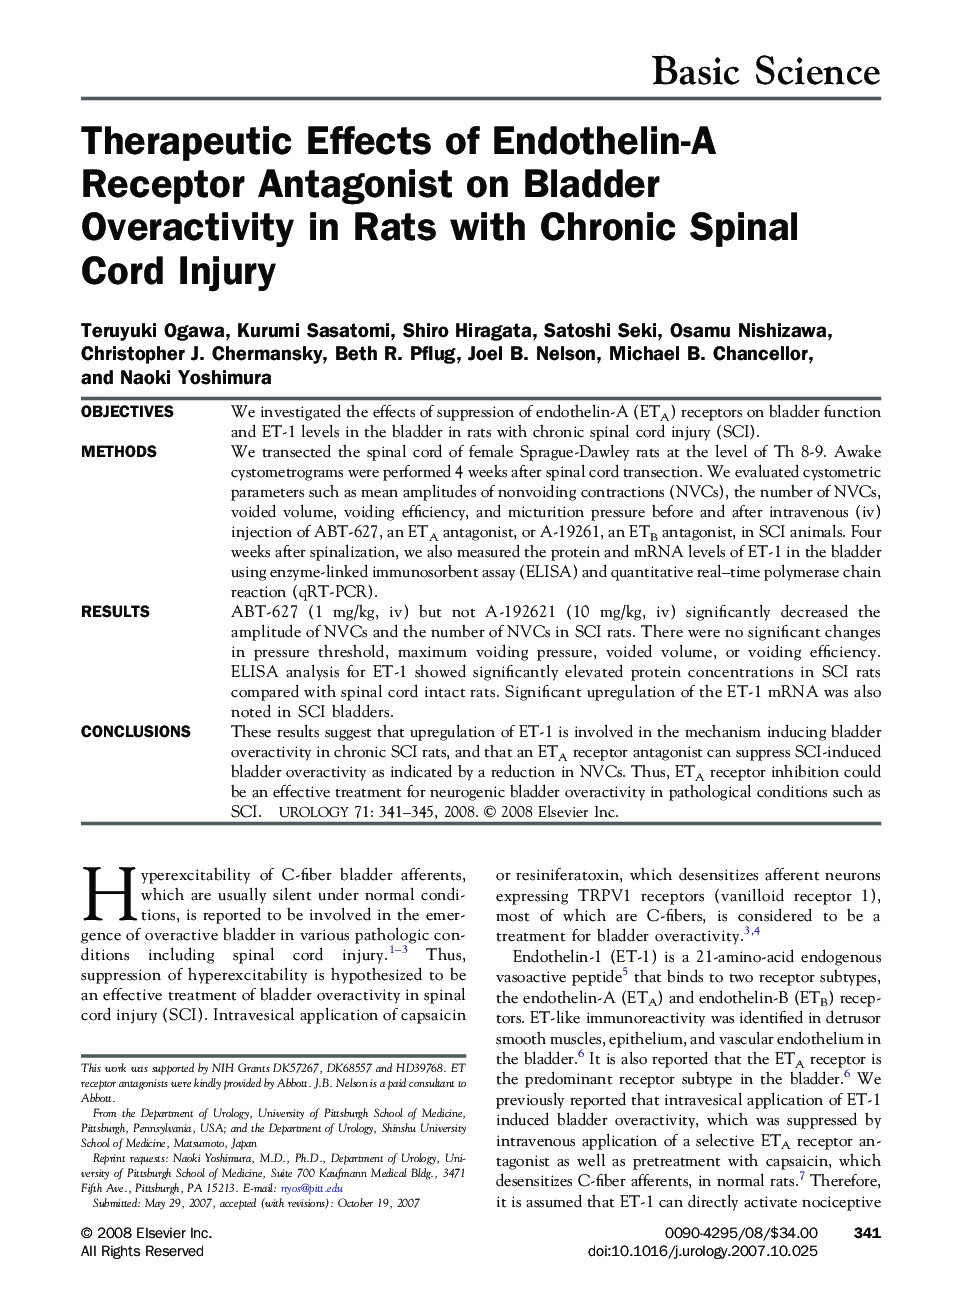 Therapeutic Effects of Endothelin-A Receptor Antagonist on Bladder Overactivity in Rats with Chronic Spinal Cord Injury 